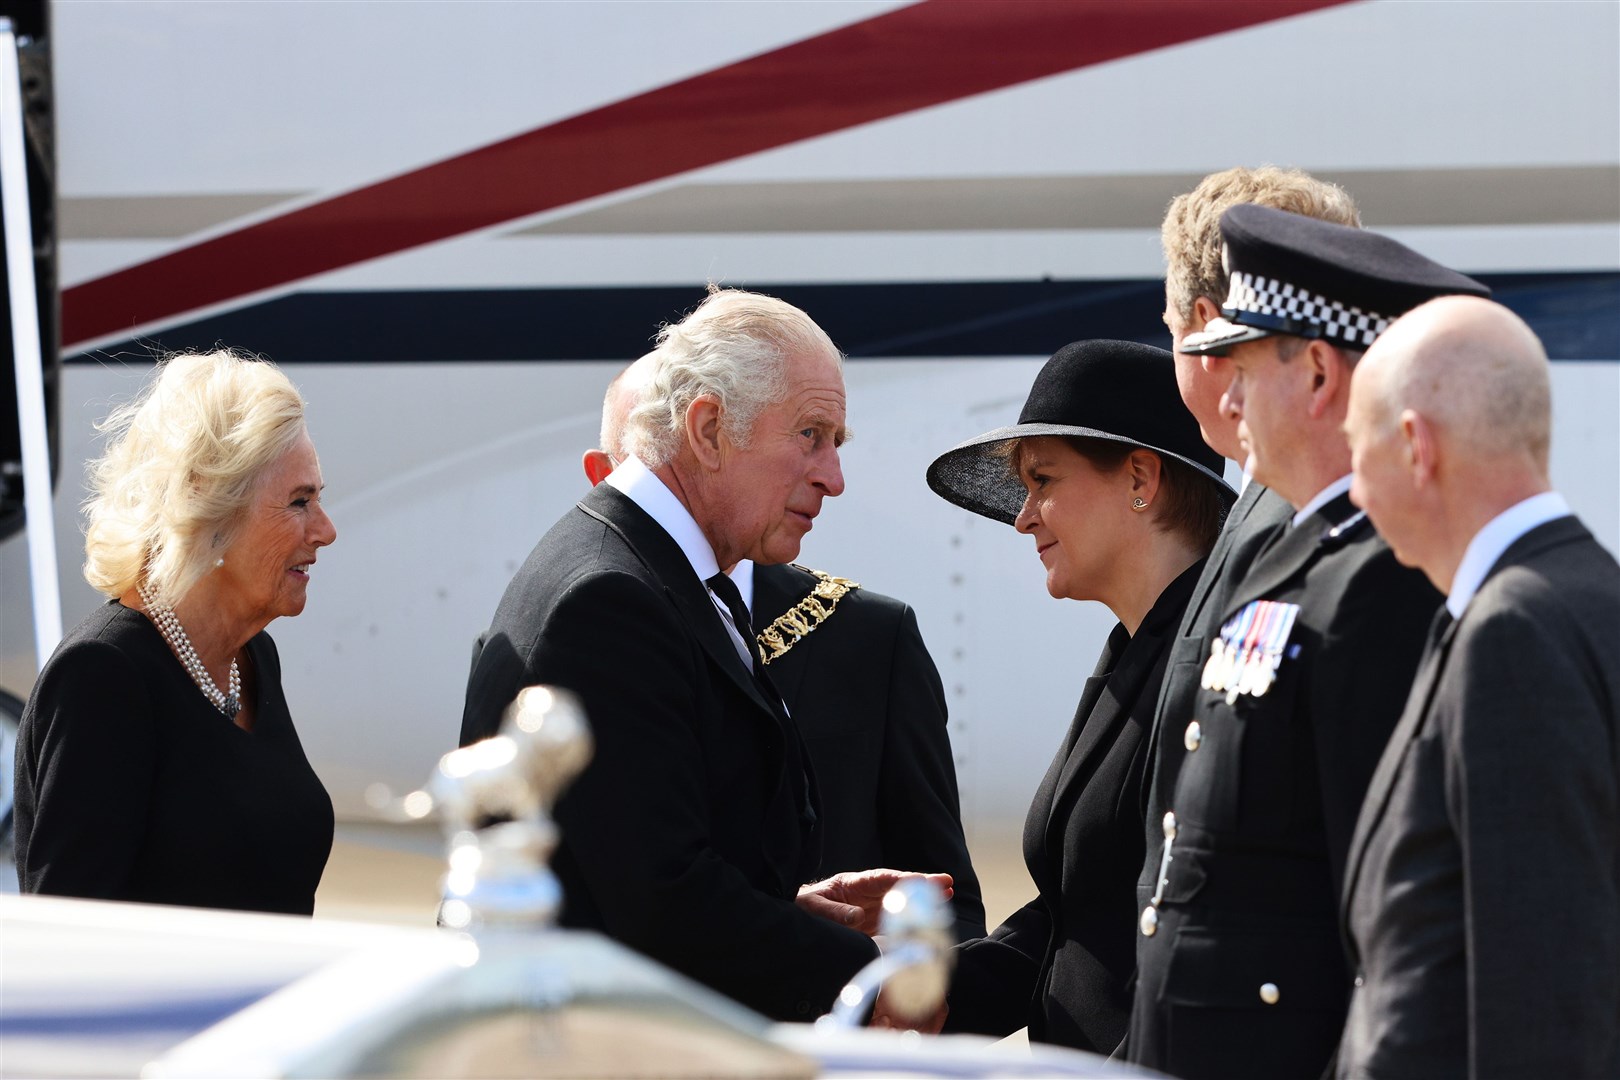 Meeting the King and Queen Consort as they arrive at Edinburgh Airport after travelling from London, ahead of joining the procession of the Queen’s coffin from the Palace of Holyroodhouse to St Giles’ Cathedral (Robert Perry/PA)